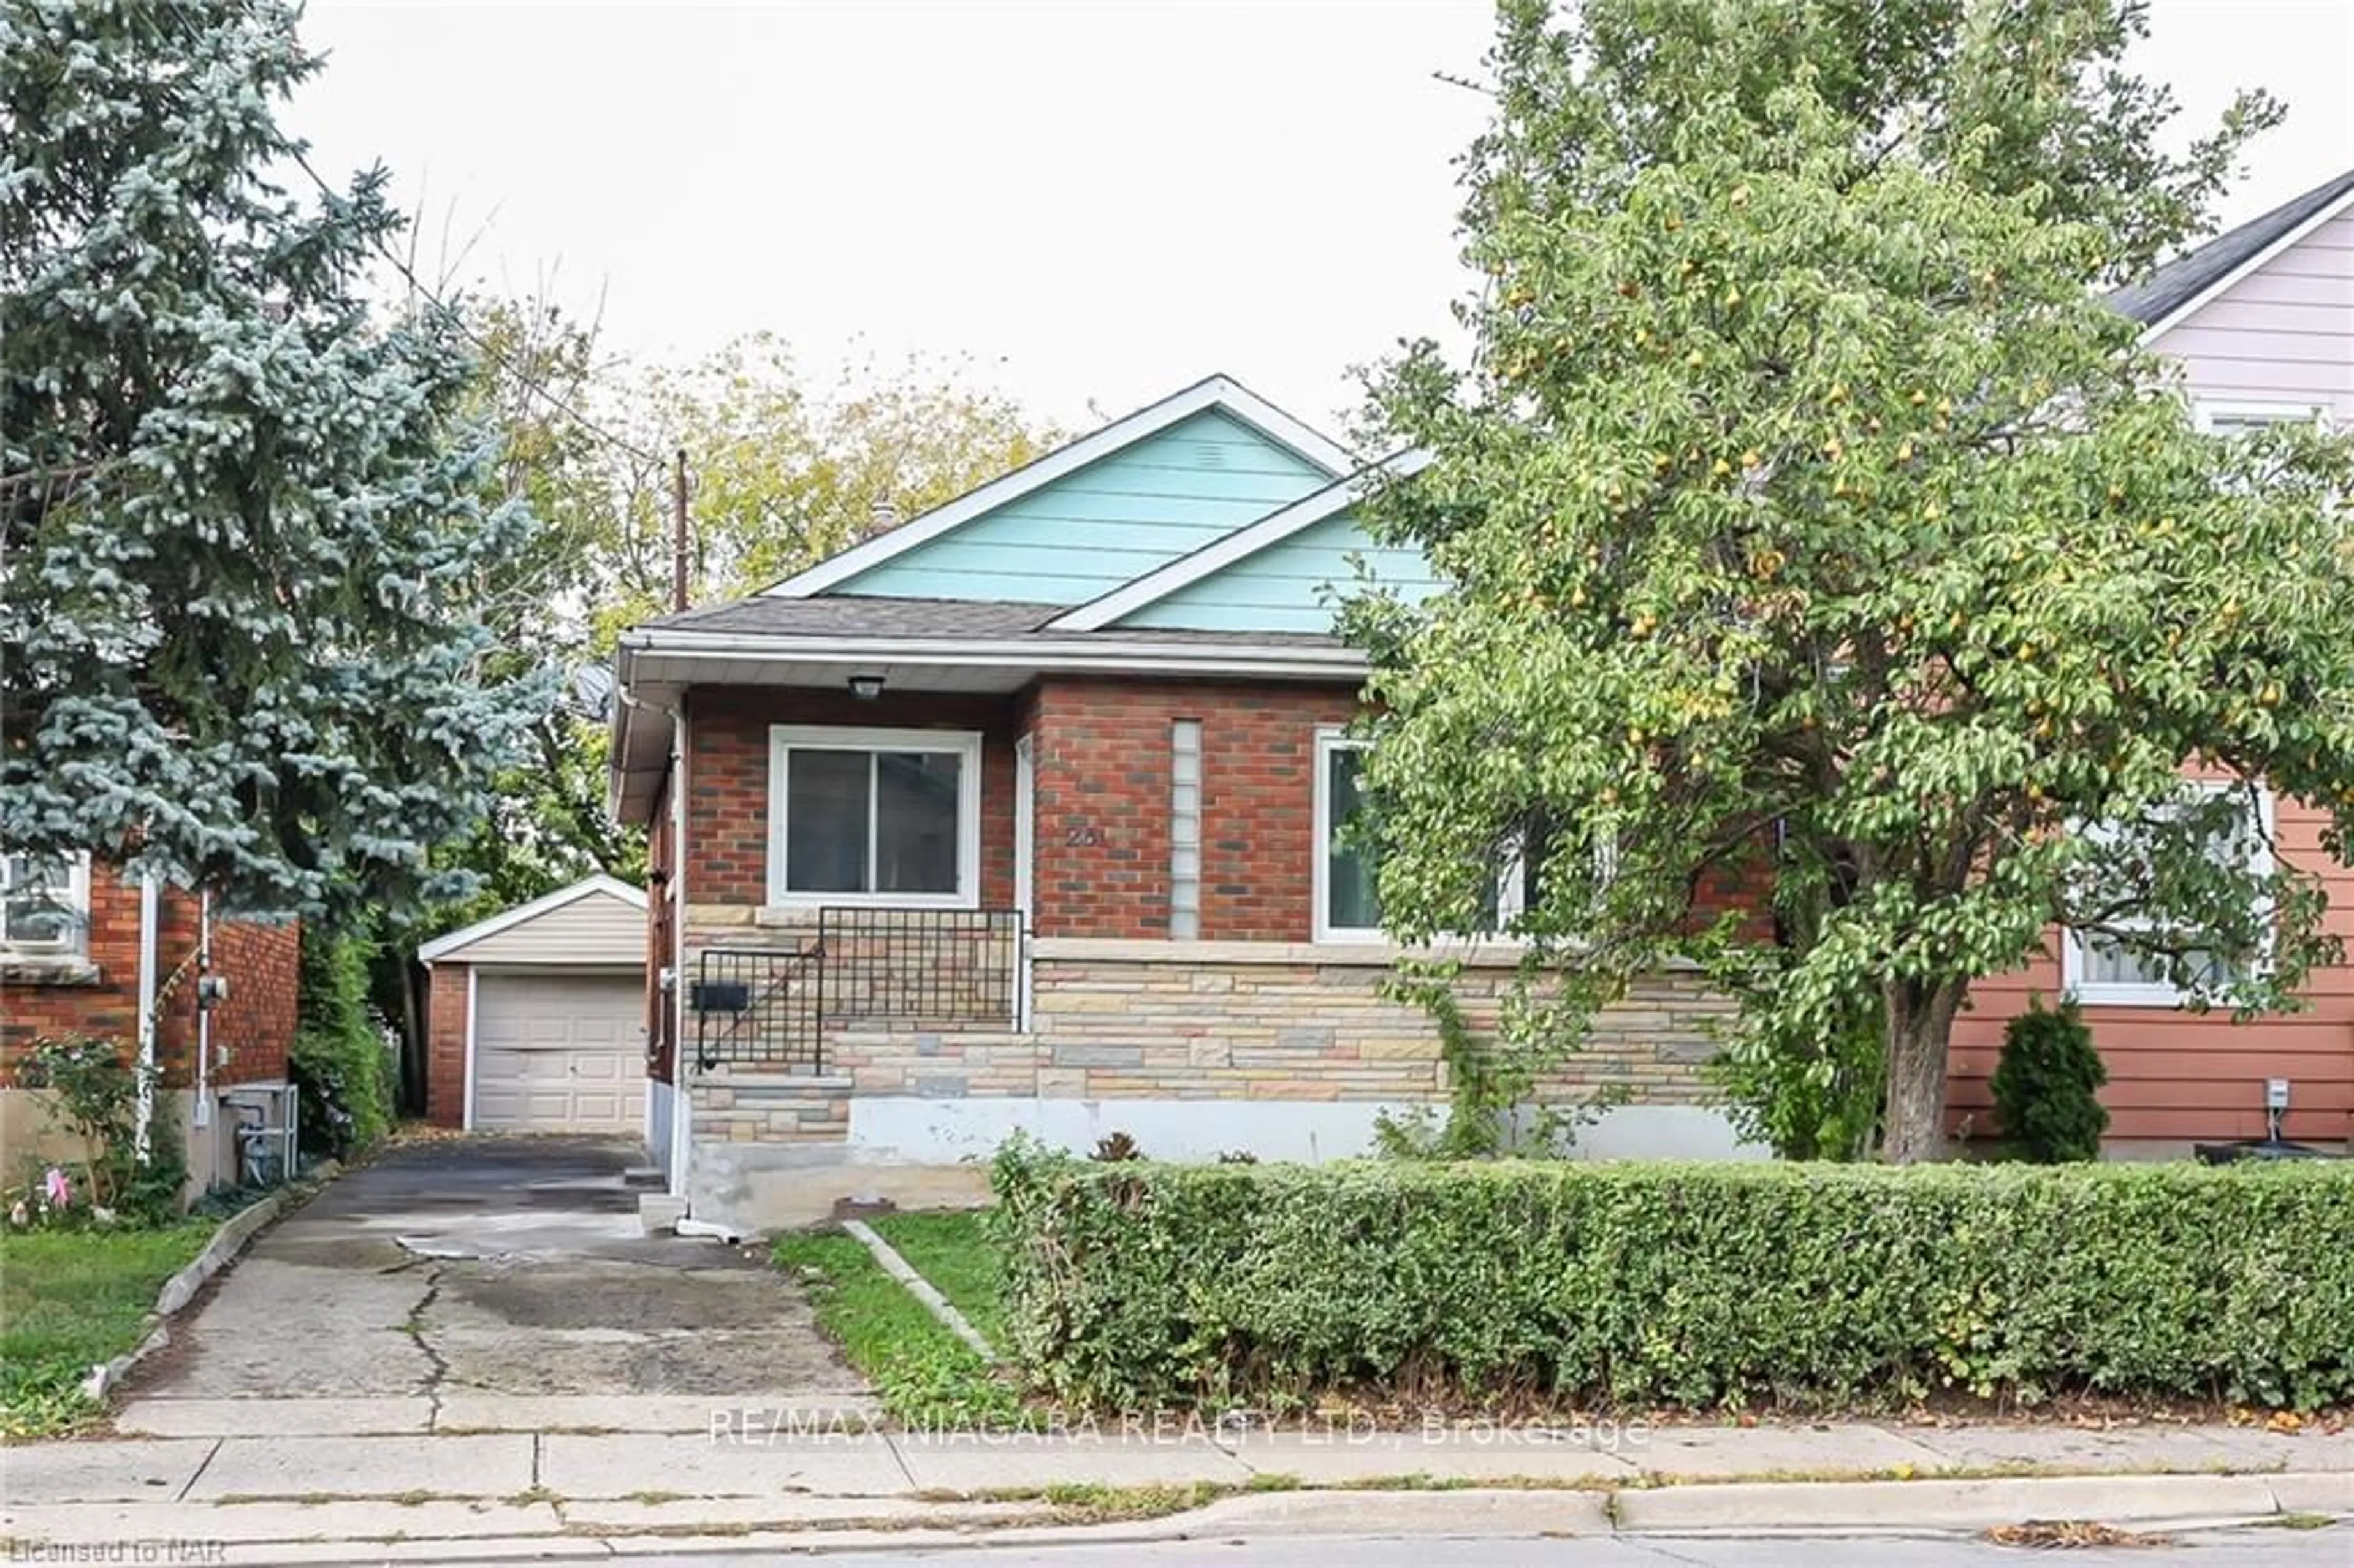 Home with brick exterior material for 261 Vine St, St. Catharines Ontario L2M 4T2